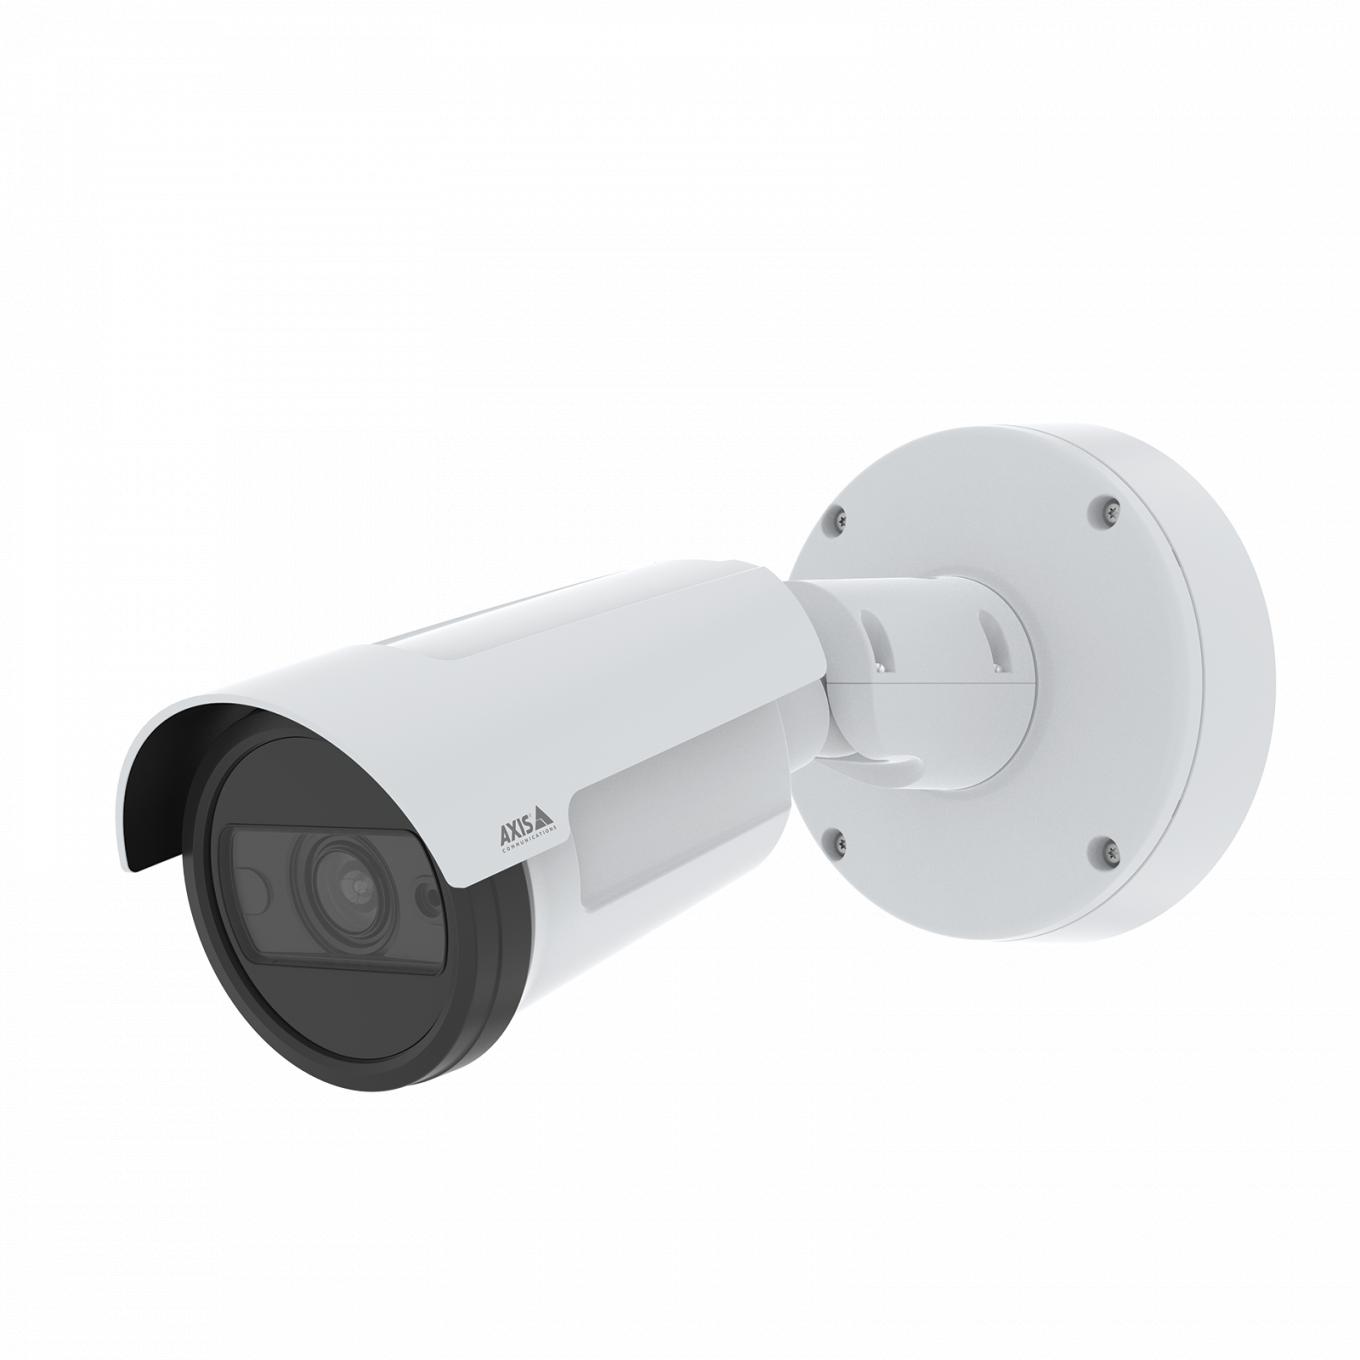 AXIS P1467-LE Bullet Camera | Axis Communications